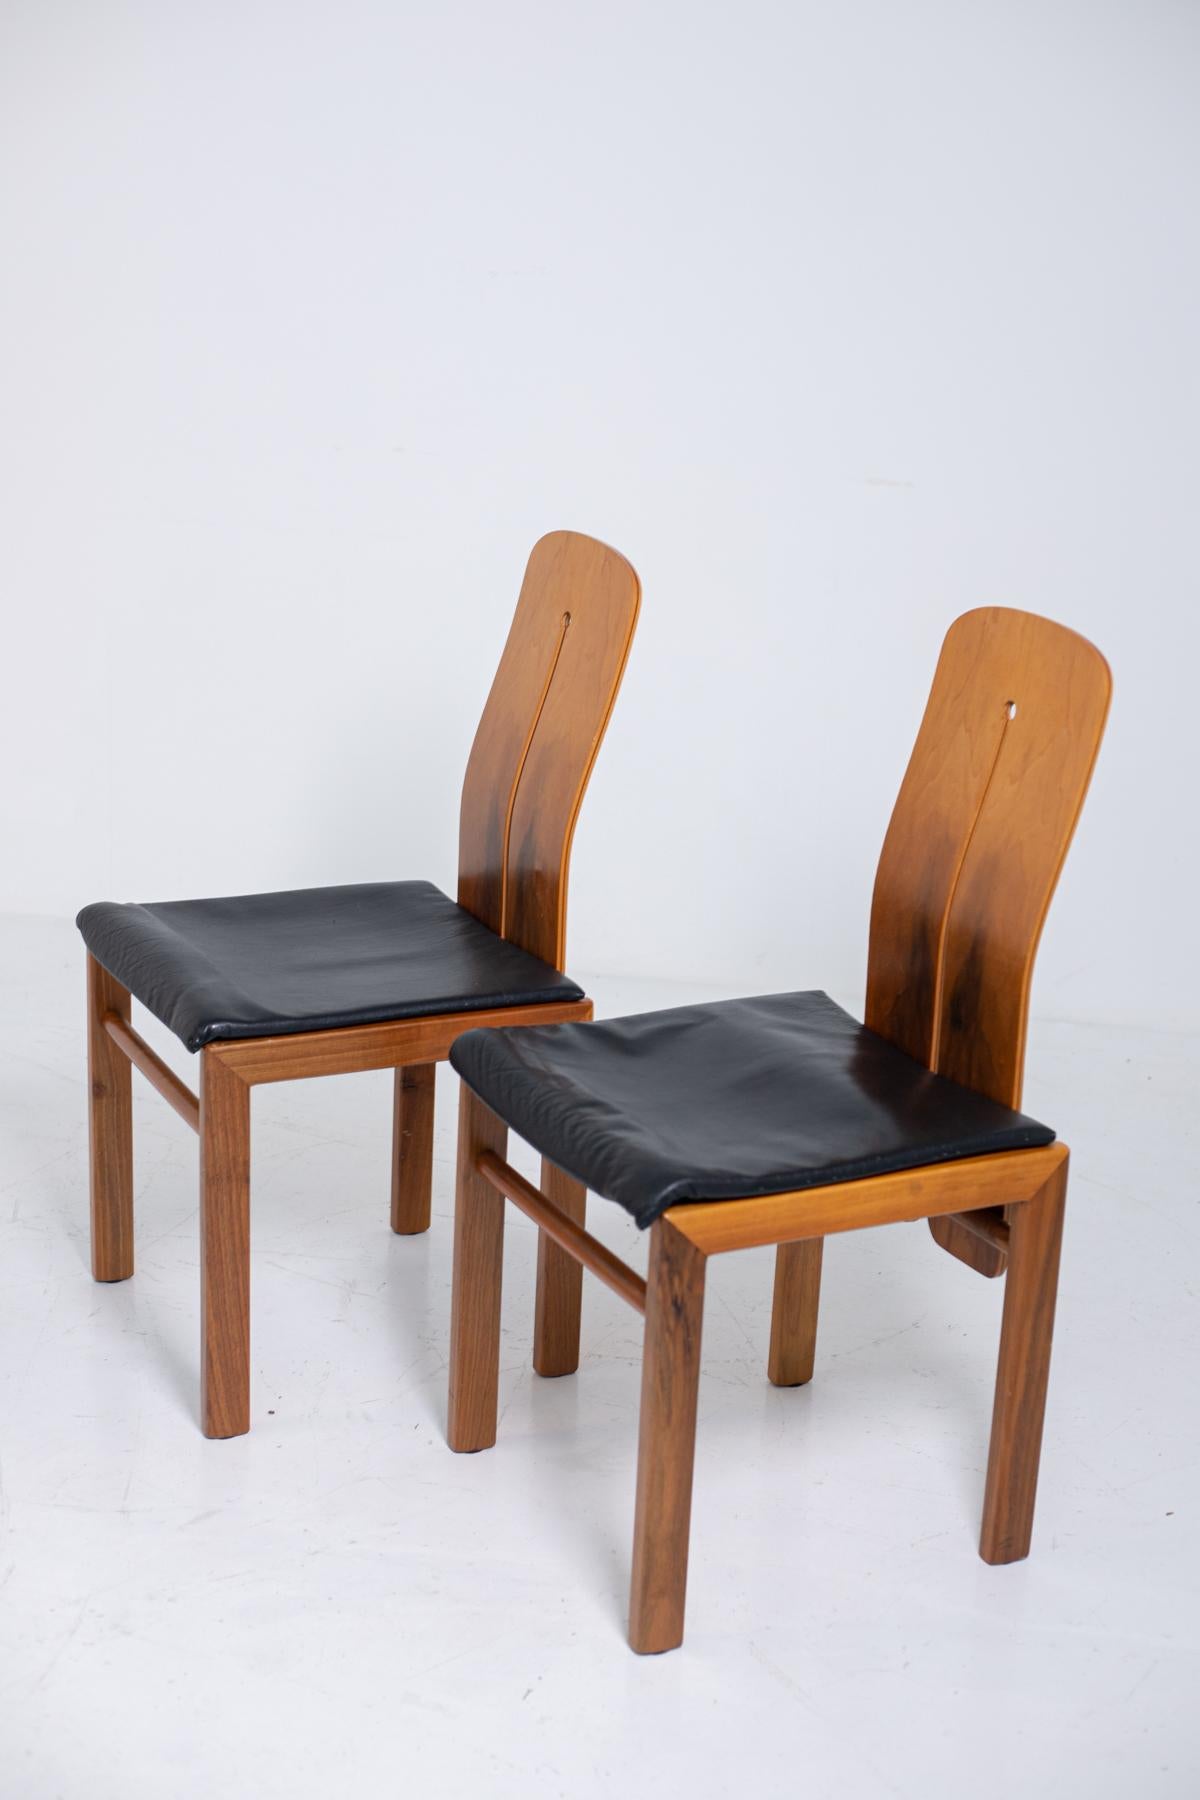 Elegant set of four chairs by Carlo Scarpa from the 1960s.
The set is made of a beautiful wood with sculptural lines. In fact, the peculiarity of Carlo Scarpa chairs is its back made with a unique wooden shell of rectangular shape and fluid with a